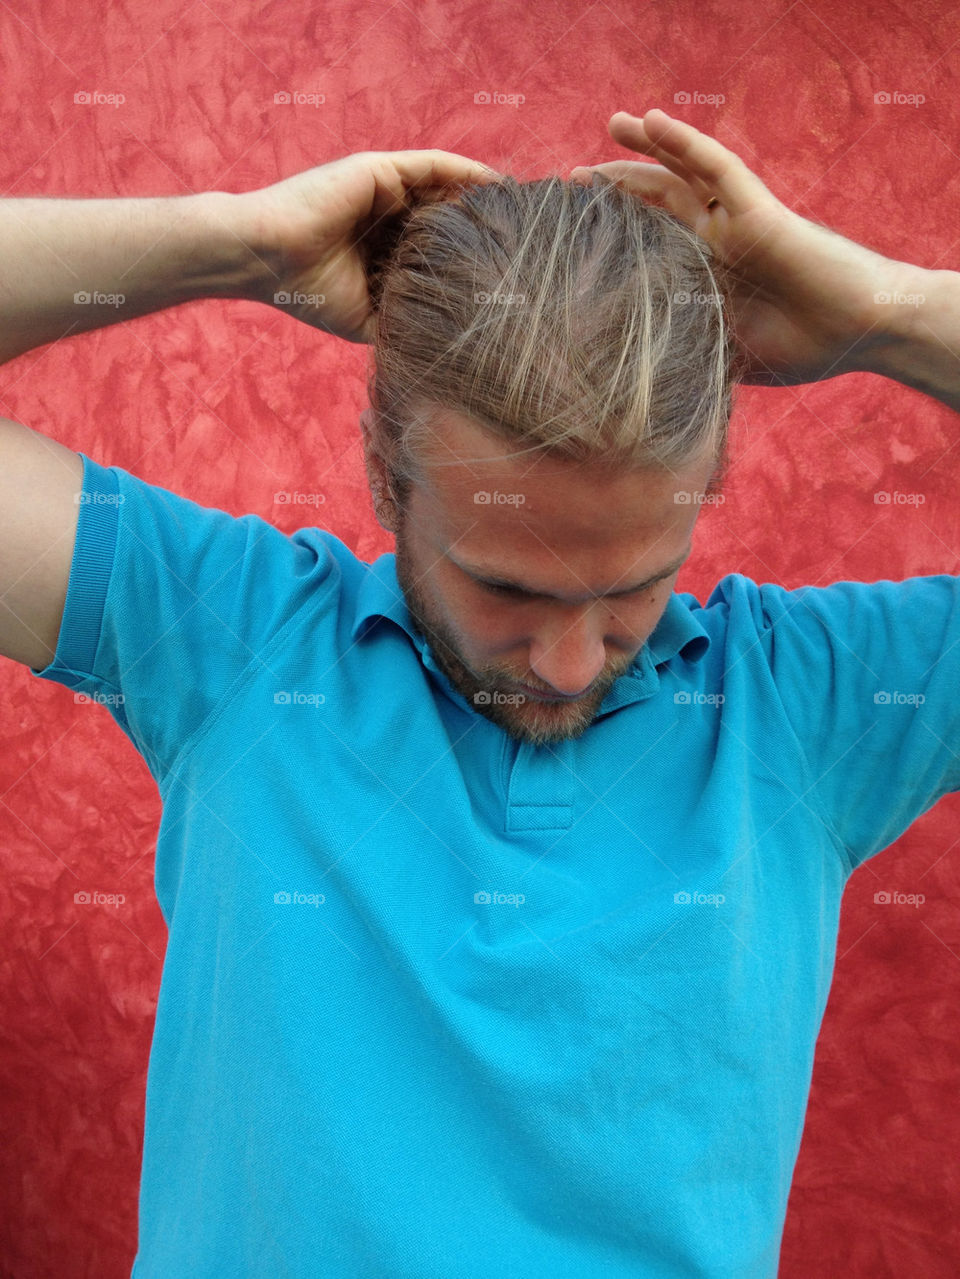 Man with long hair. Man with long hair in turquoise shirt is putting his hair together in a ponytail and stands in front of a red wall
